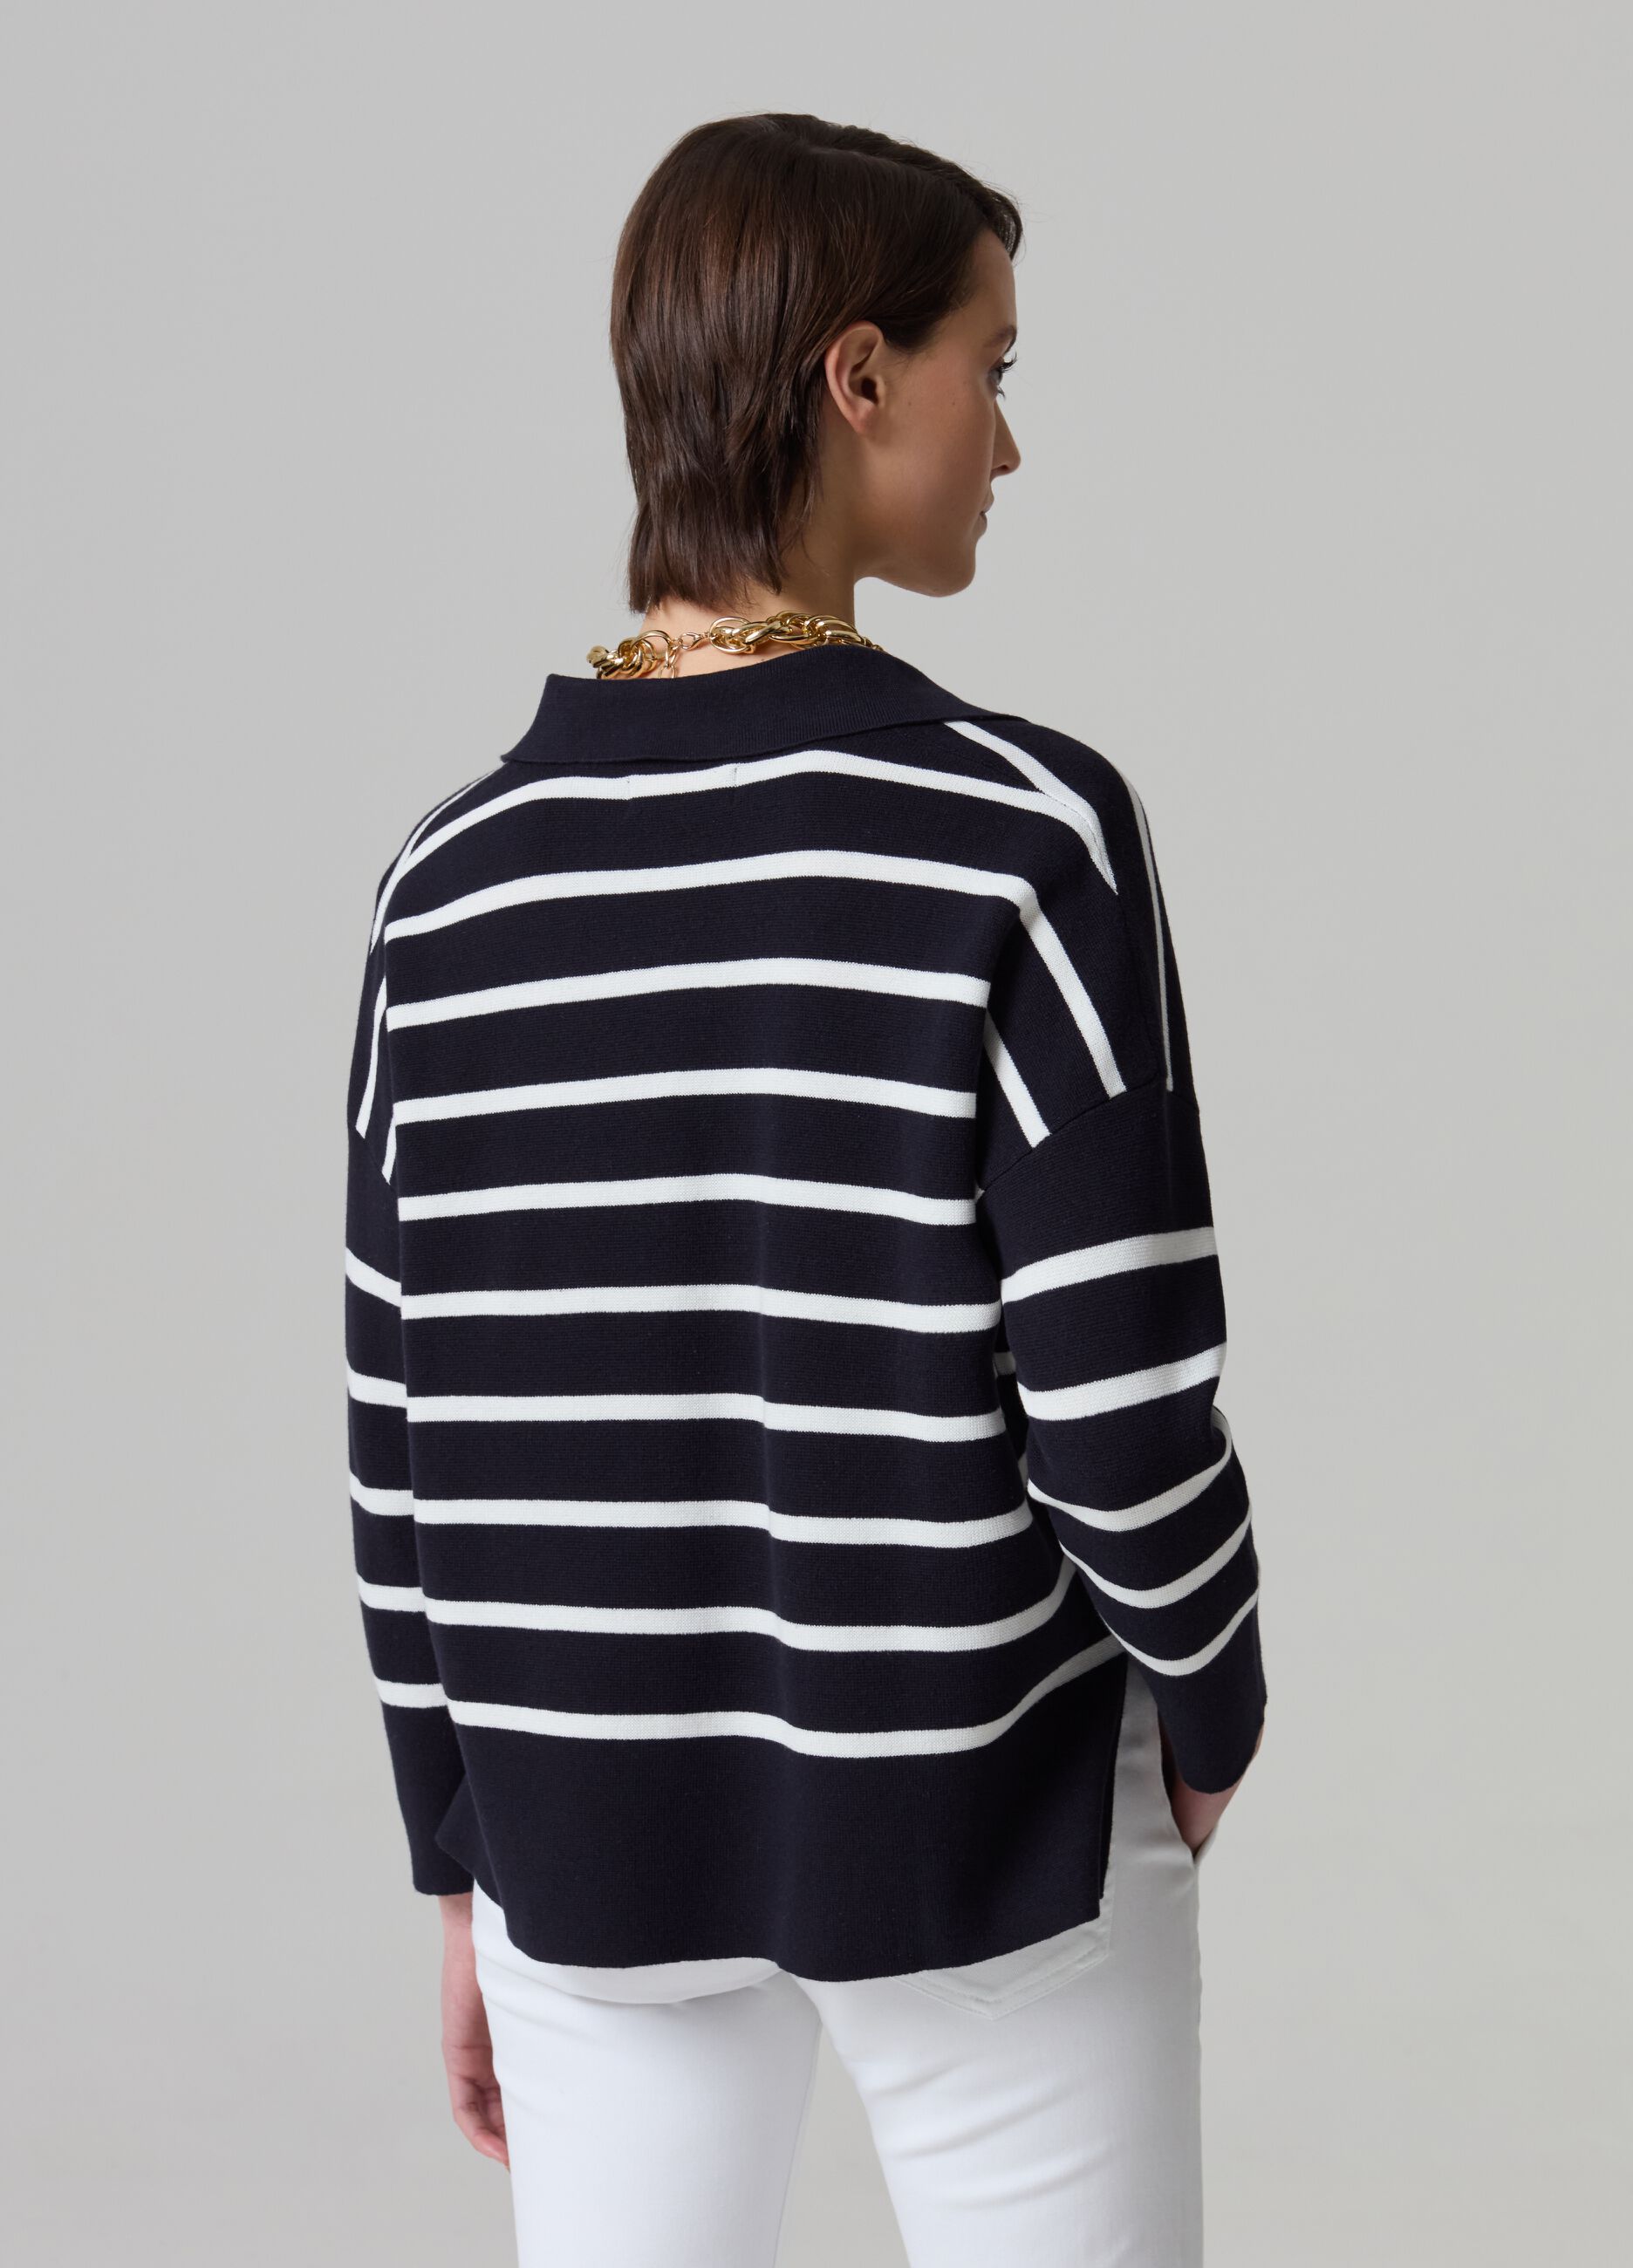 Striped oversized top with polo neck